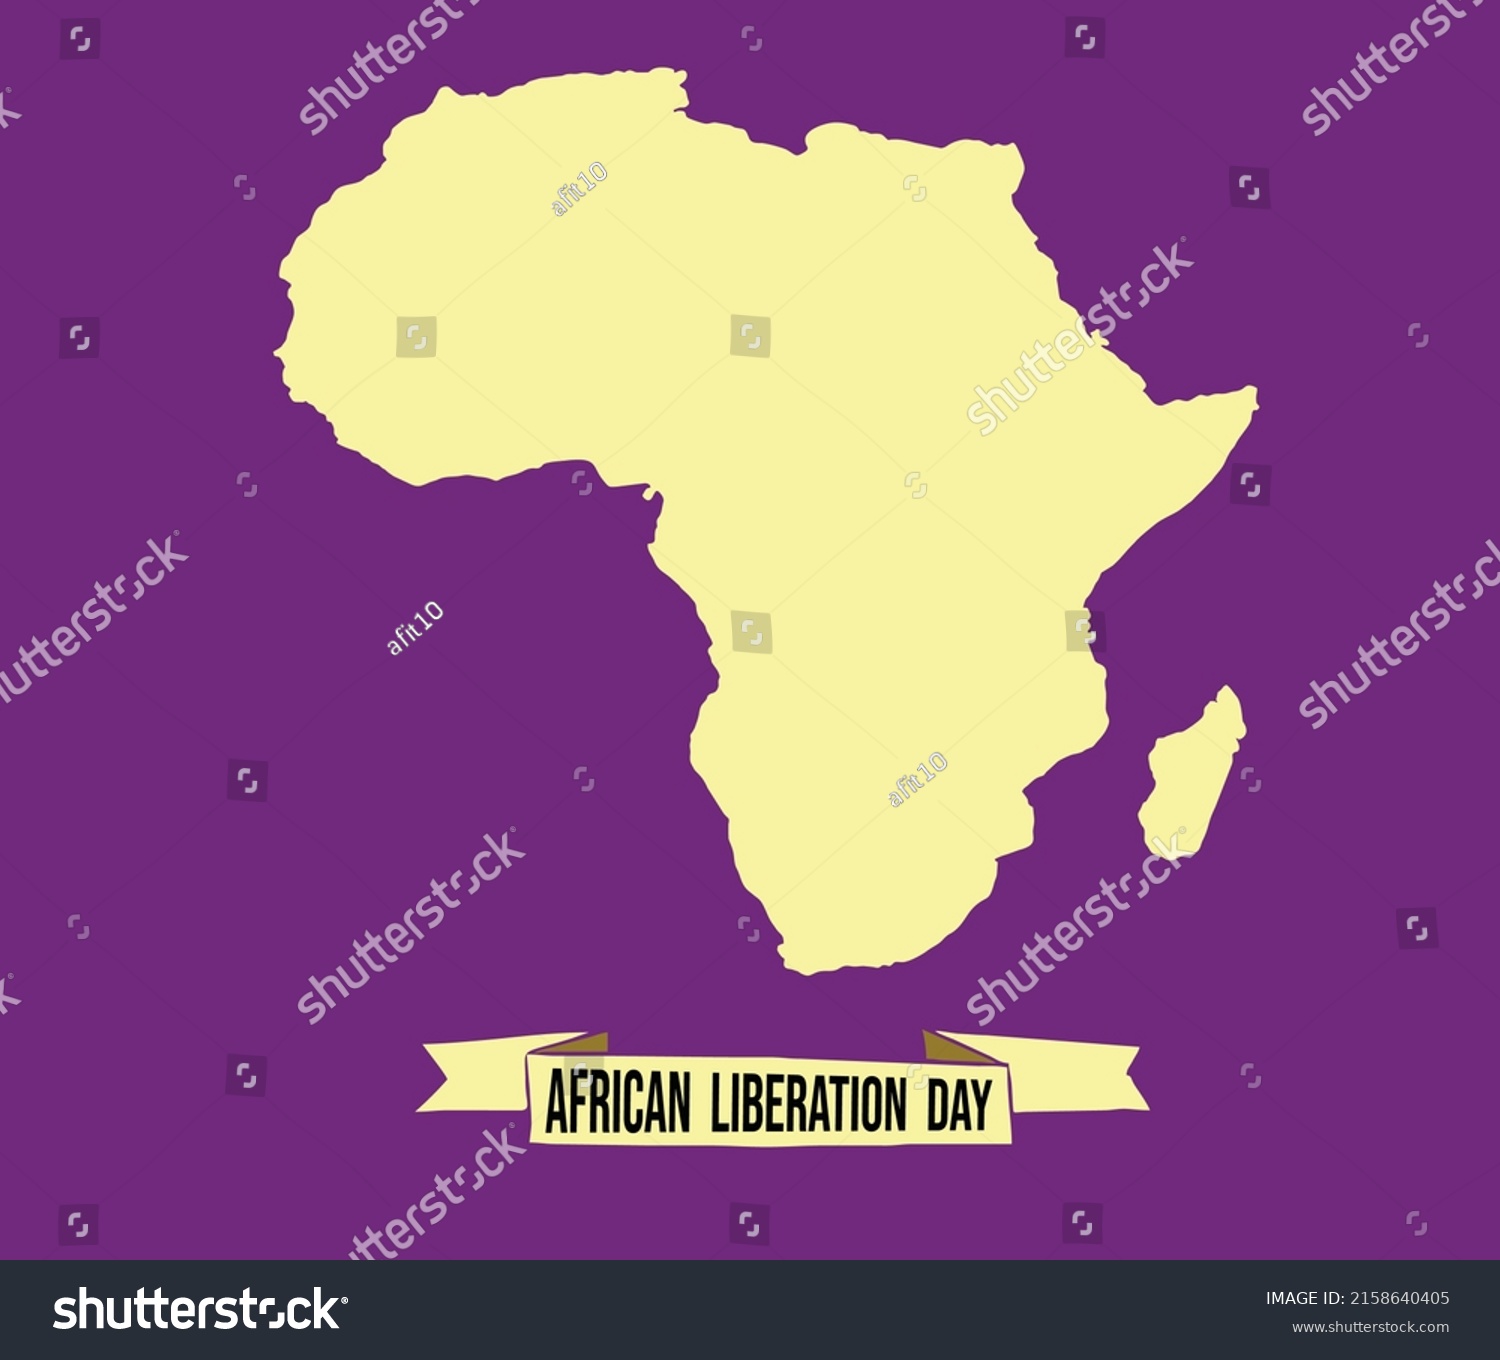 Vector Image African Continent Map Addition Stock Vector Royalty Free 2158640405 Shutterstock 1268